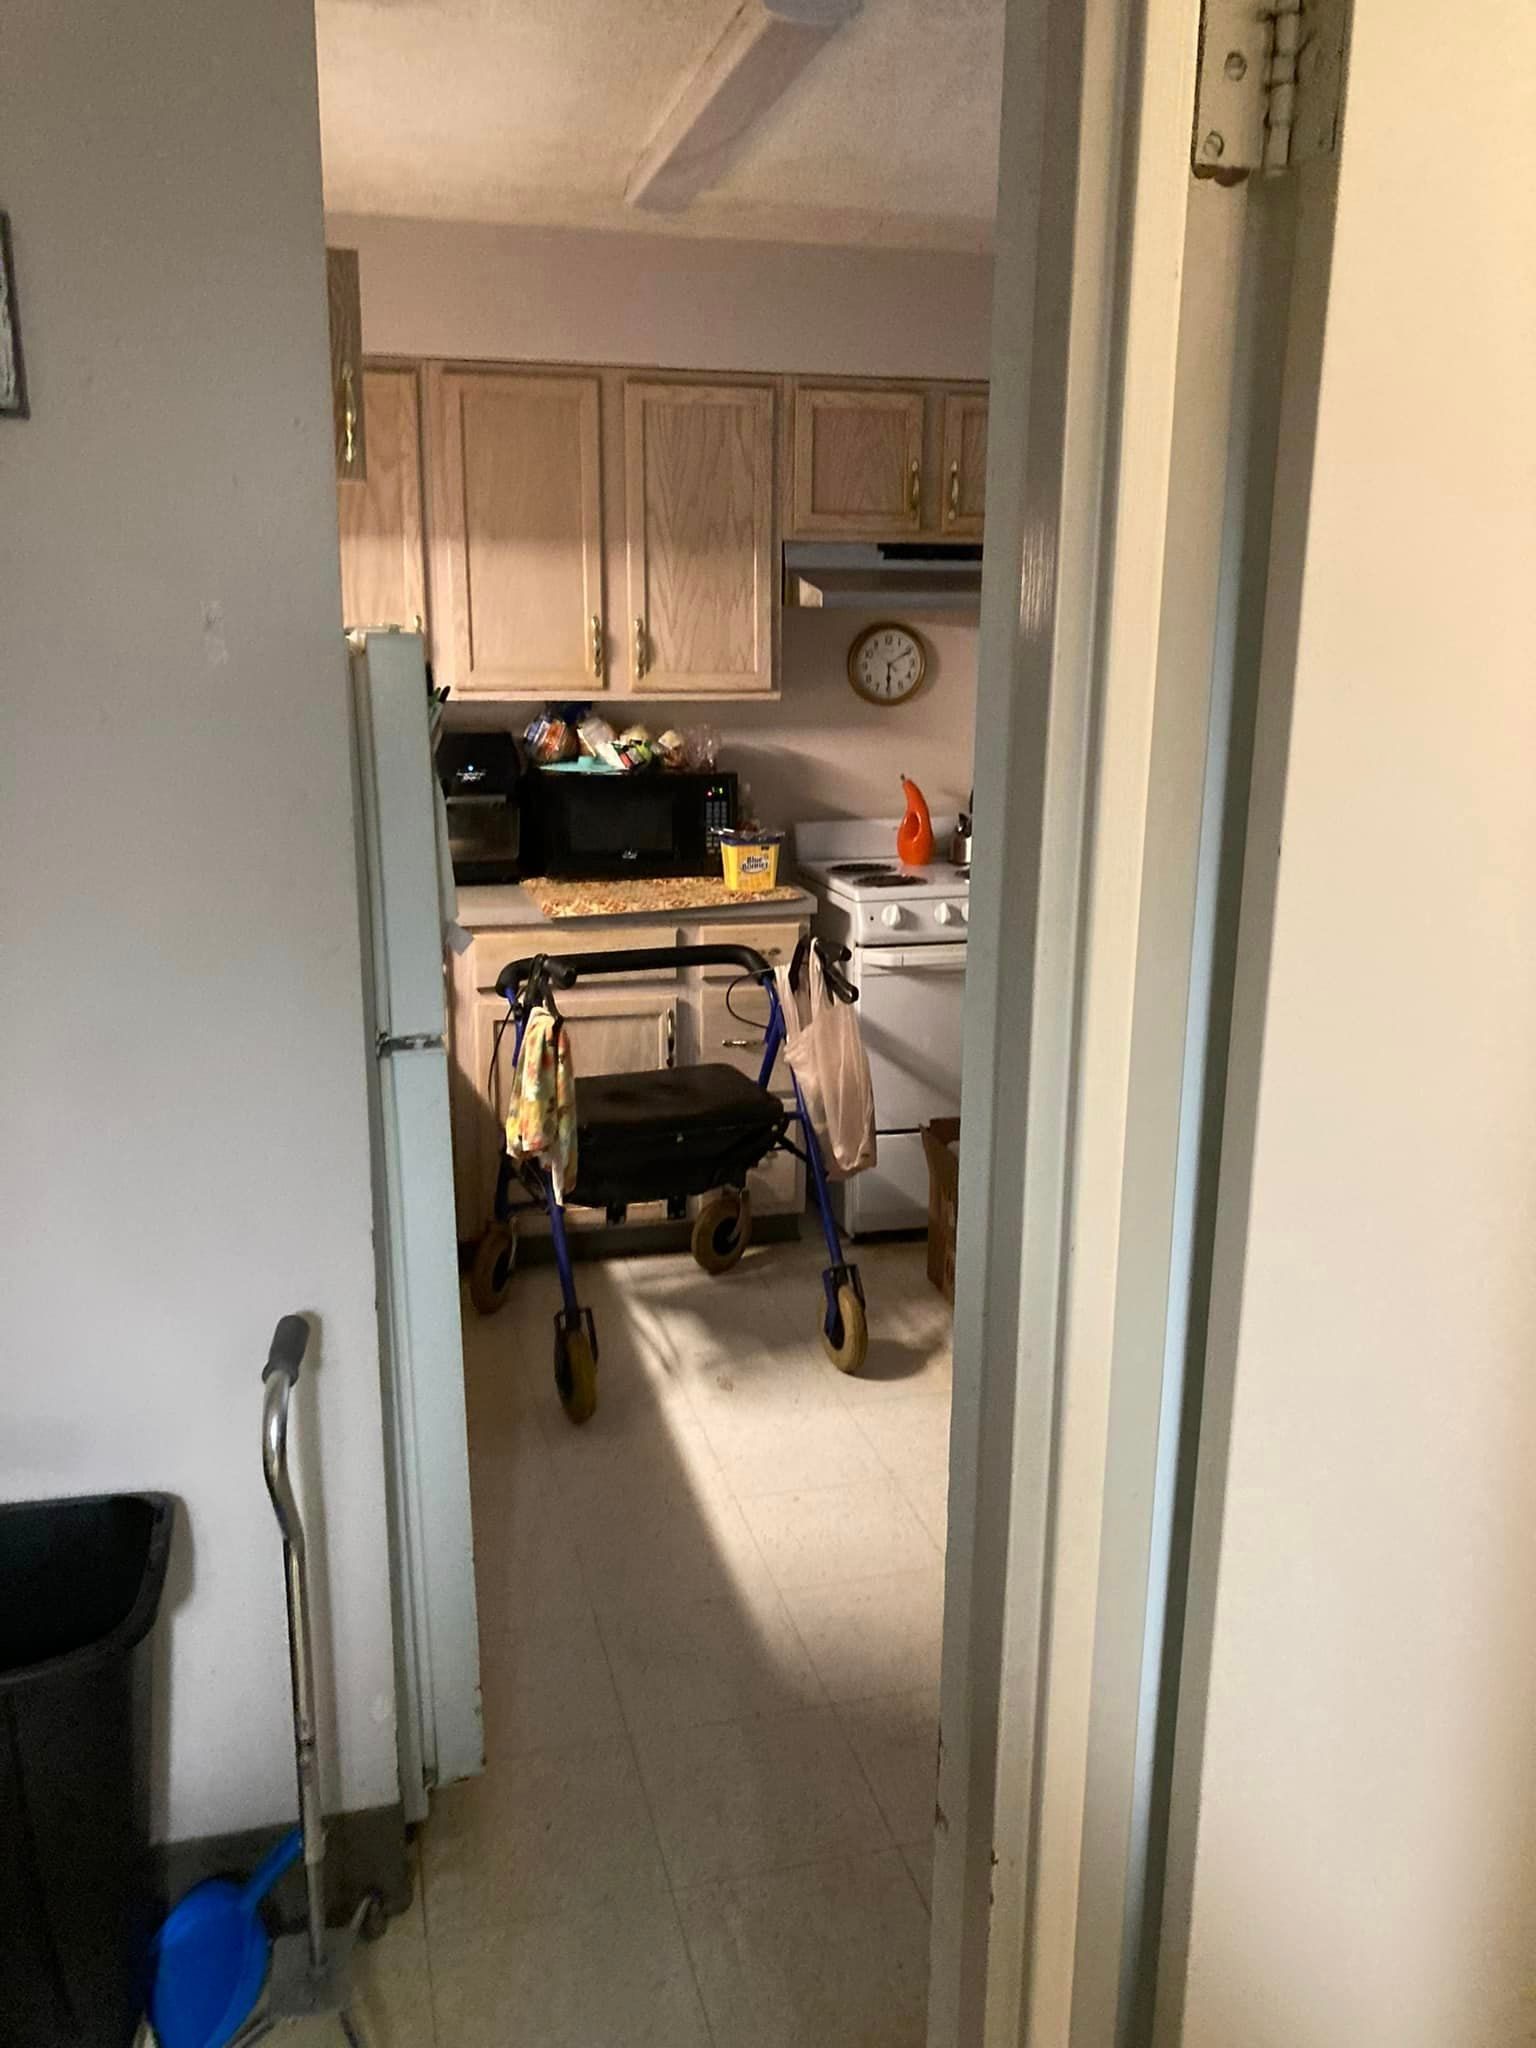 After is a tidy kitchen with the walker on the side